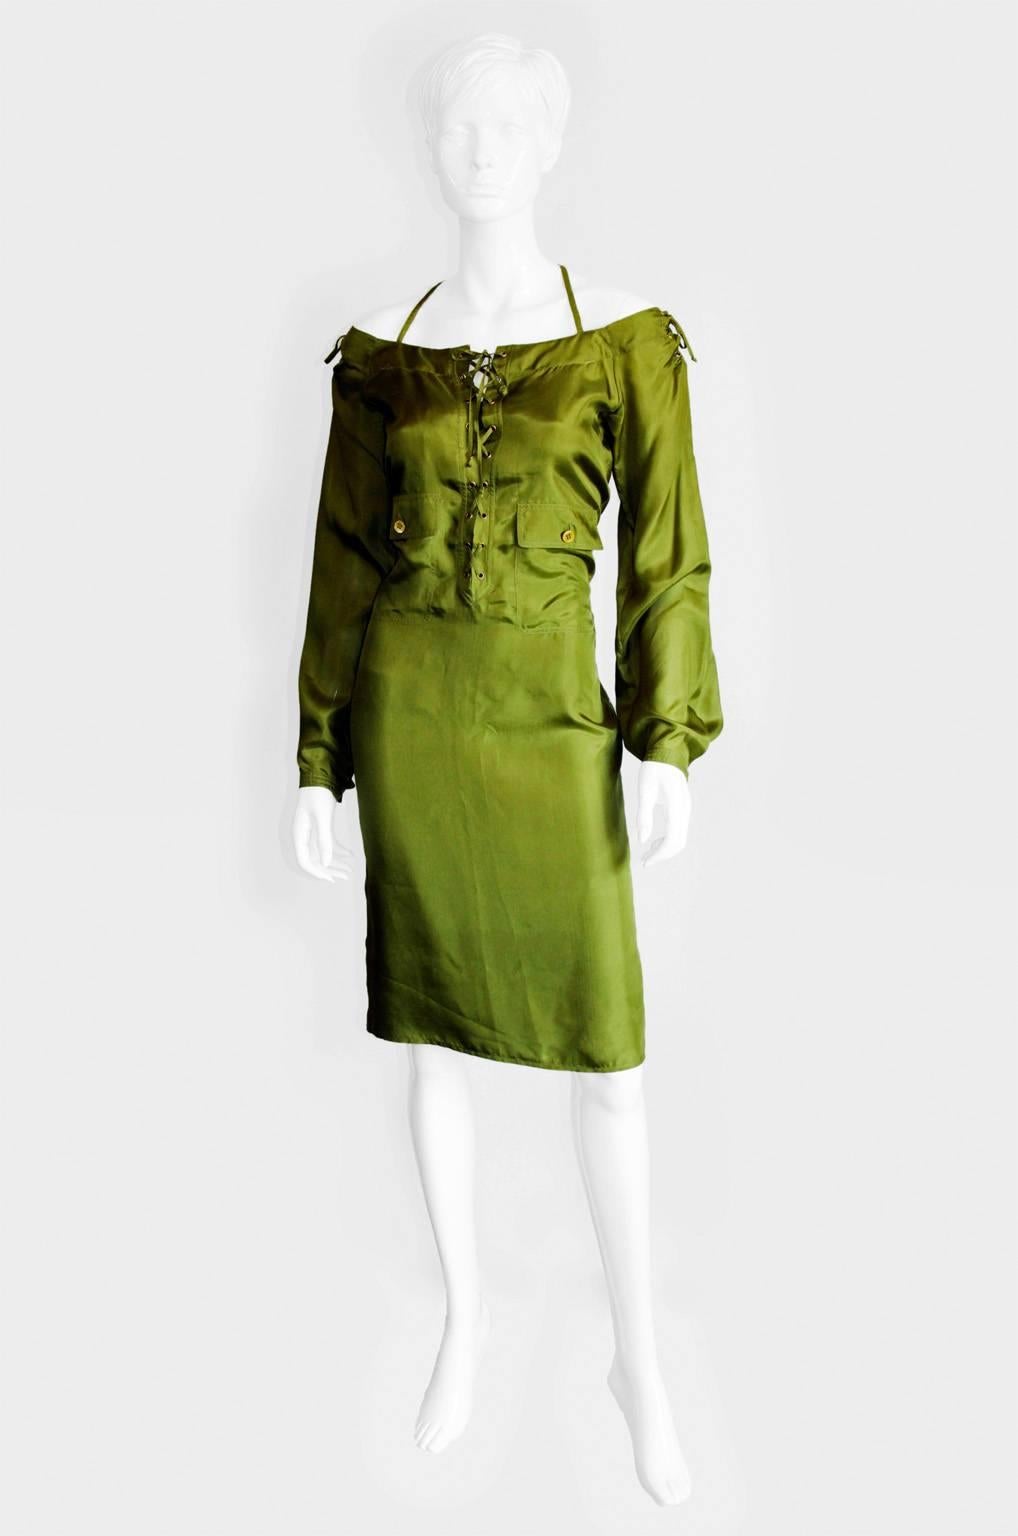 Heavenly Green Silk Tom Ford For YSL Rive Gauche Spring Summer 2002 Safari Collection Dress!

Exquisite silk knee-length dress from Tom Ford's acclaimed Spring/Summer 2002 Safari/Mombasa Collection for YSL Rive Gauche. This very special piece is